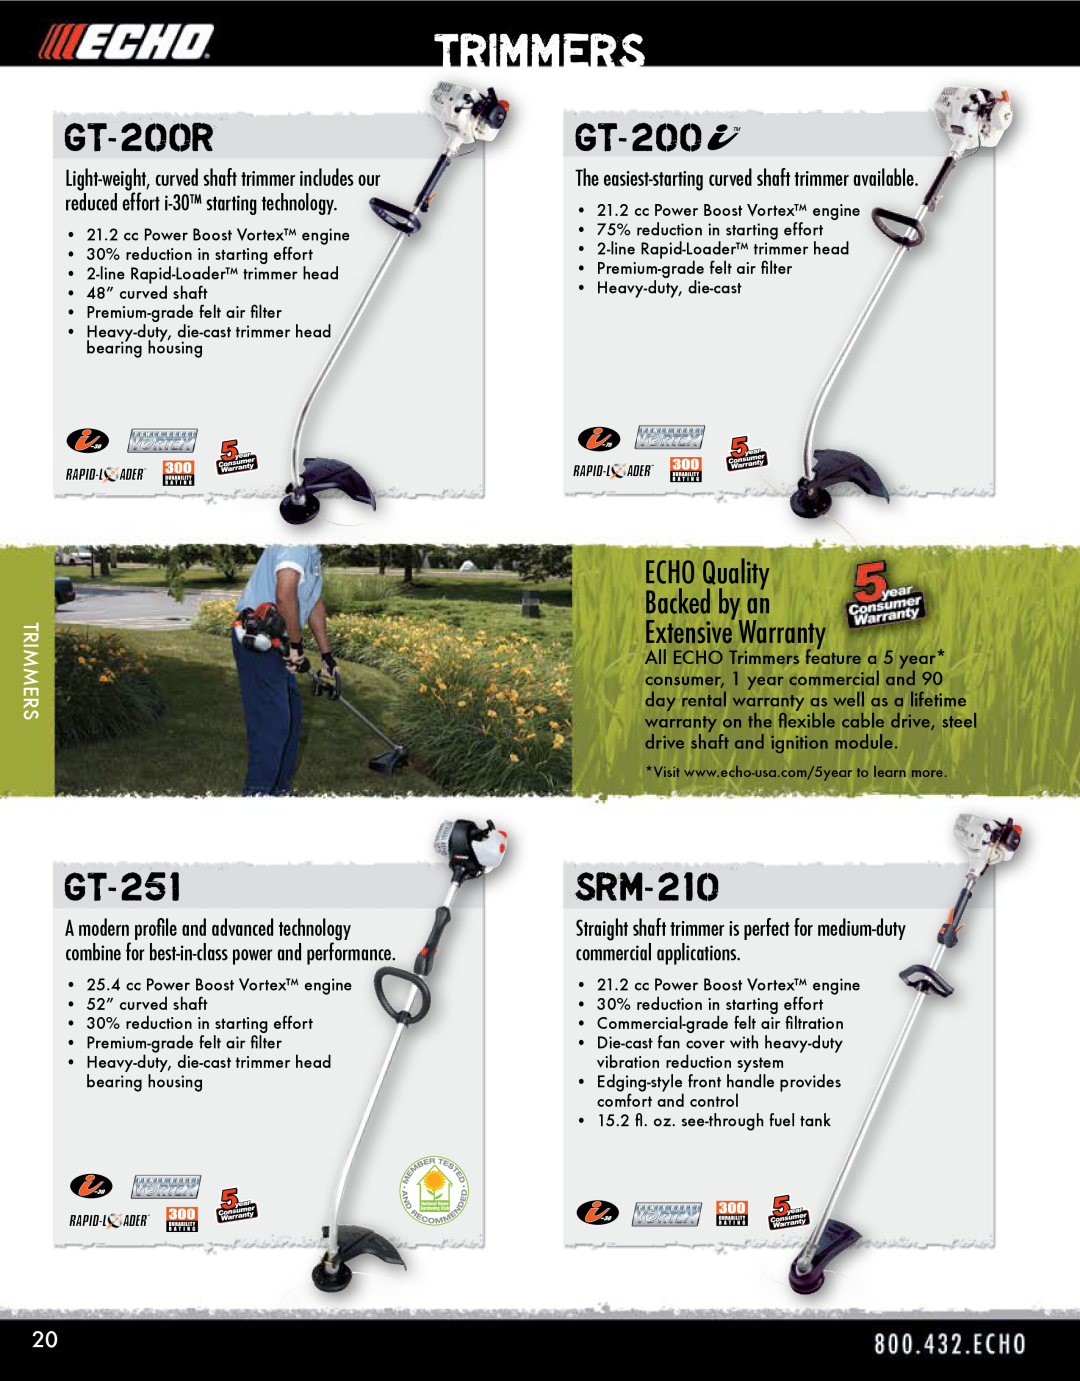 Echo HV-110XG manual Trimmers, GT-200R, GT-251, SRM-210, The easiest-starting curved shaft trimmer available 